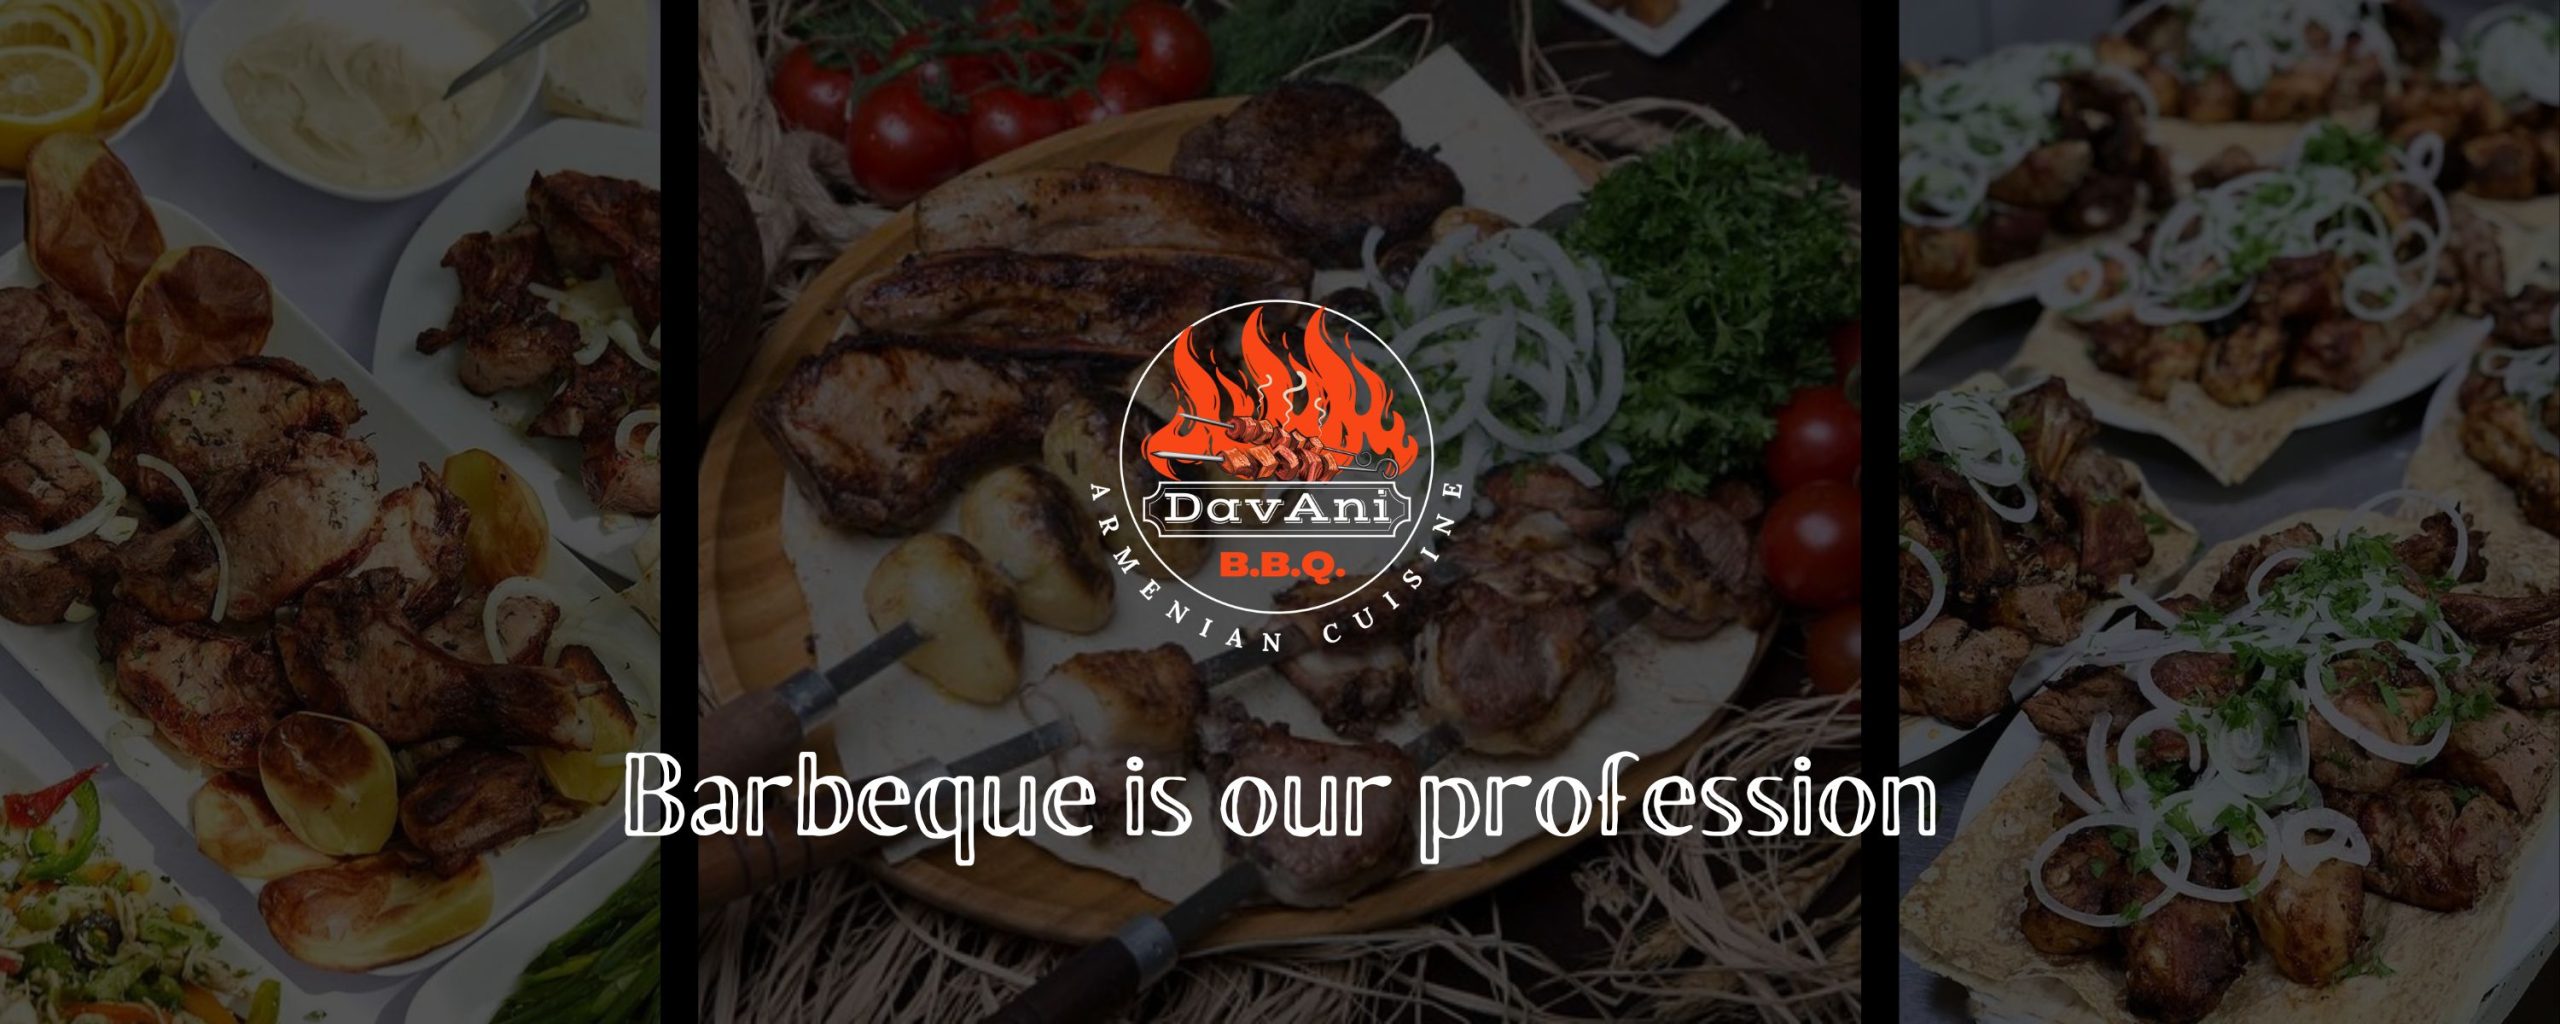 Barbeque is our profession...